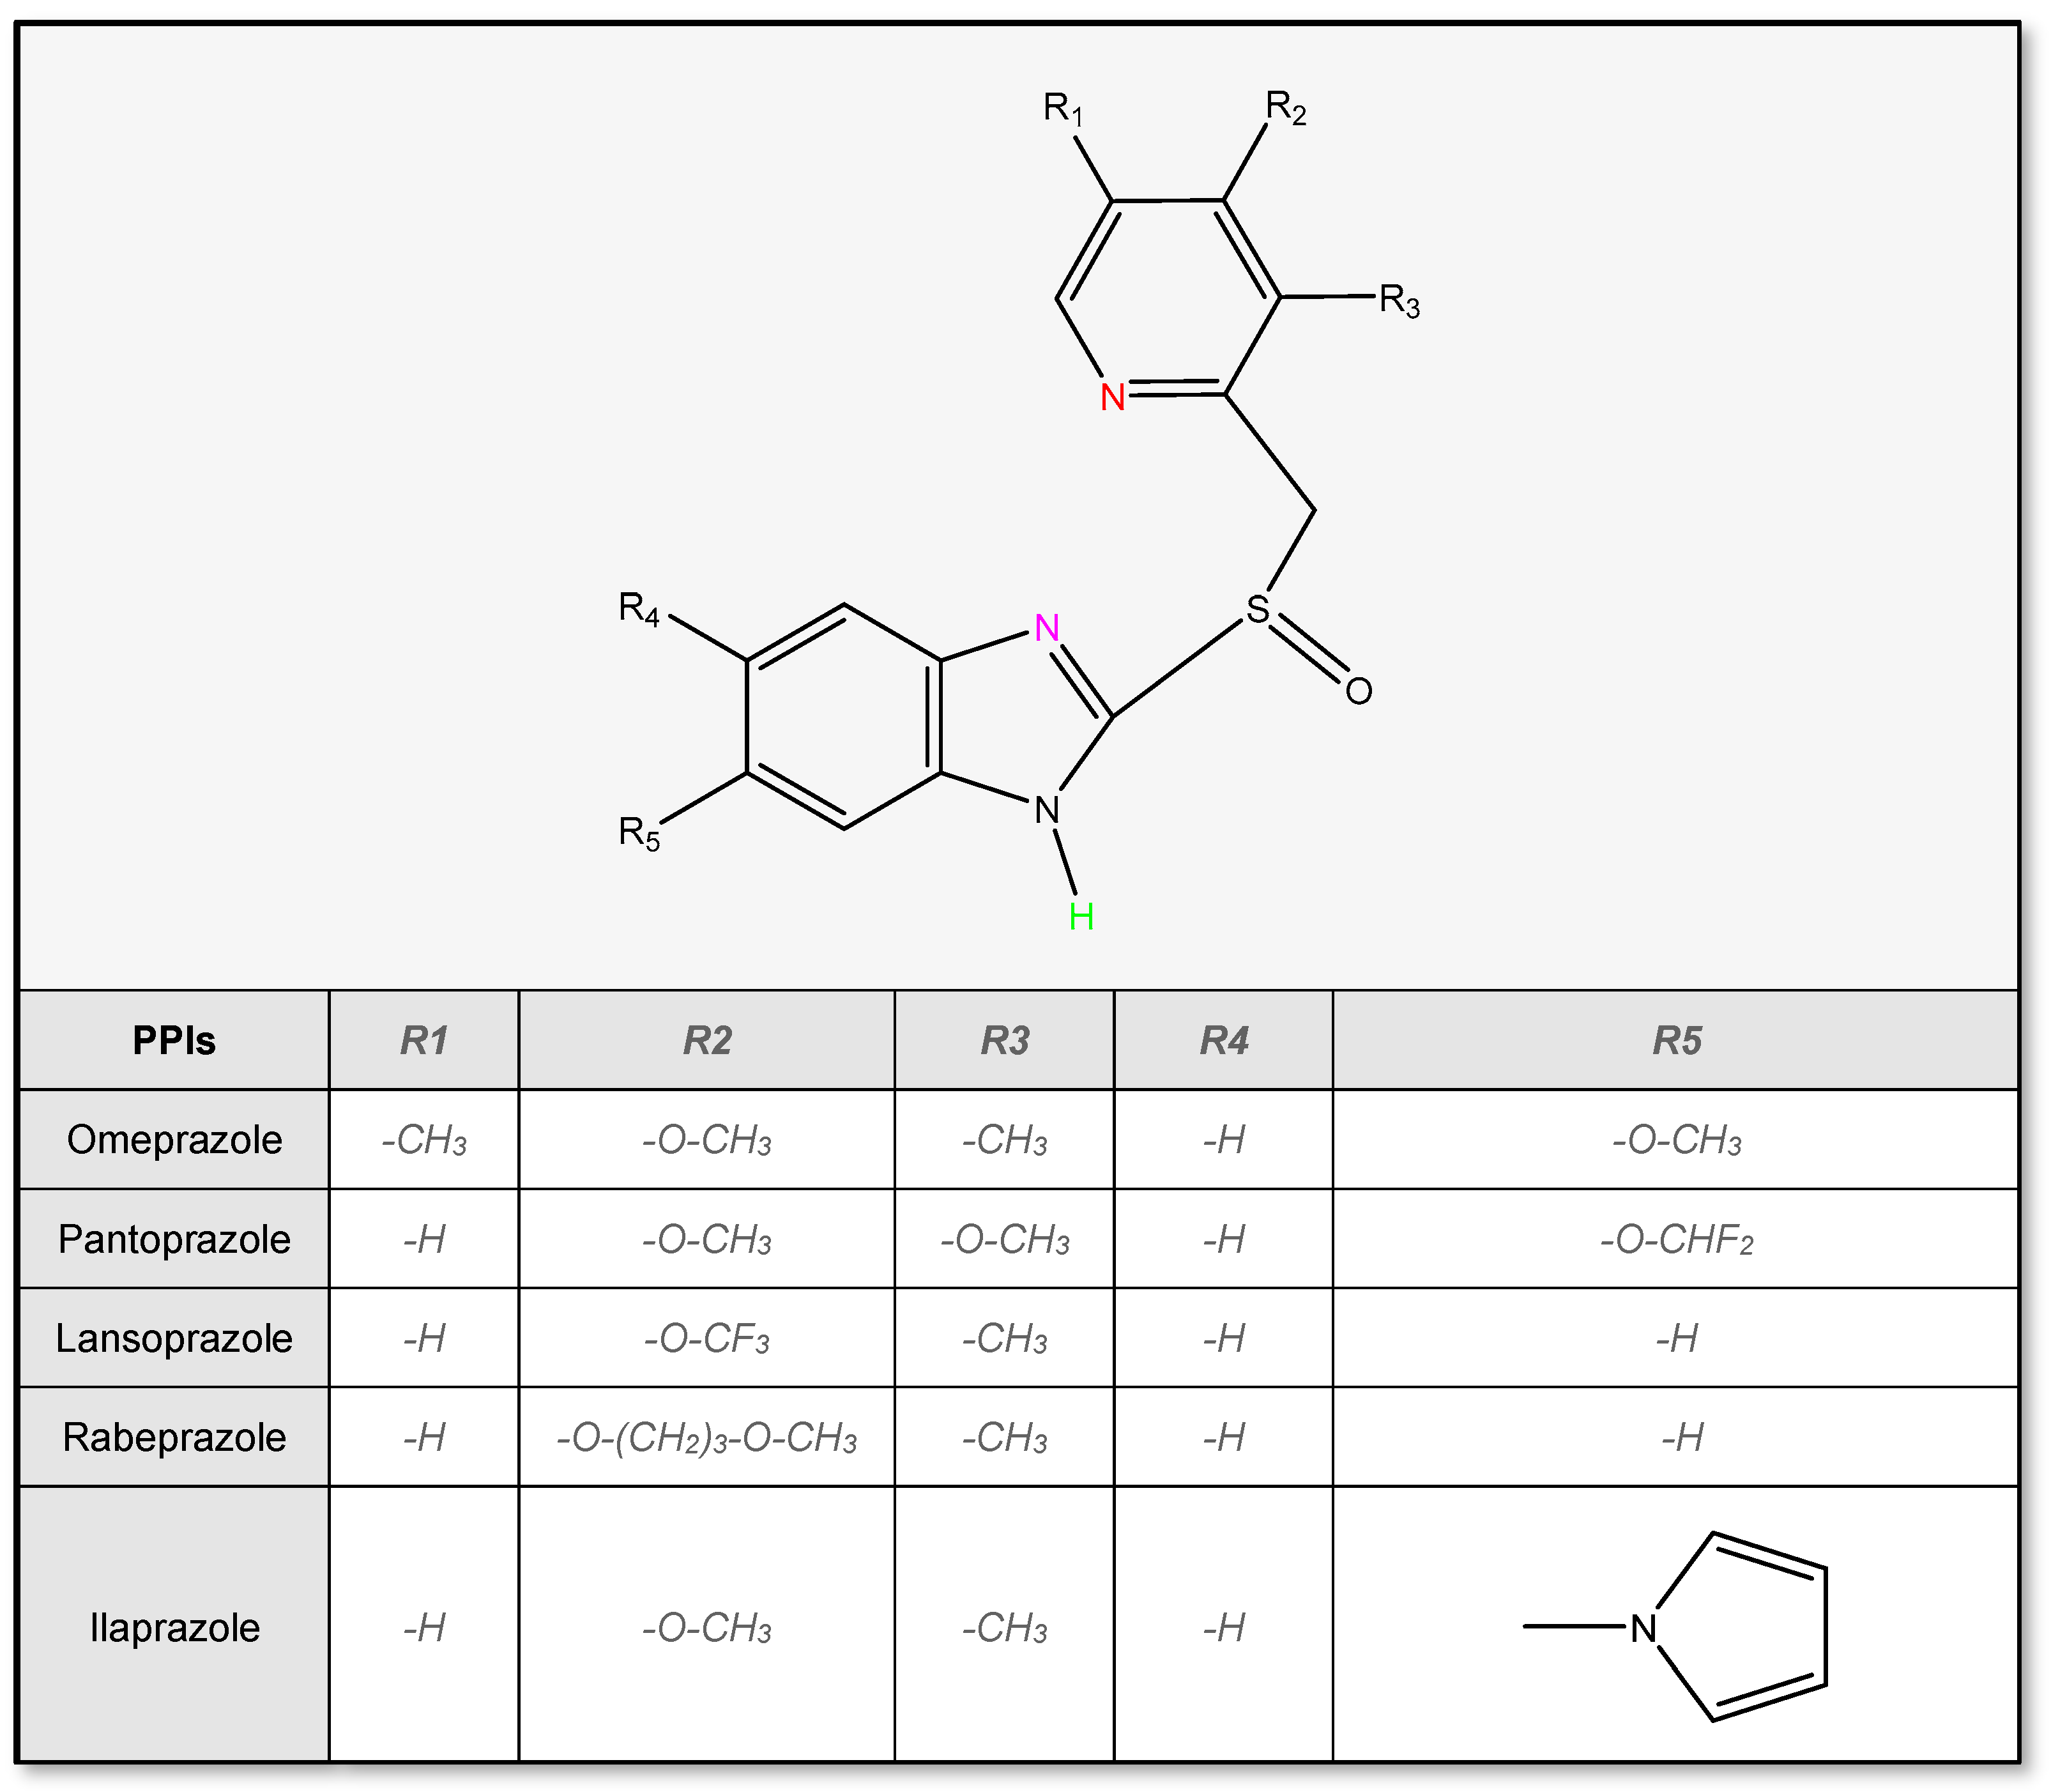 PDF) PHOTOCHEMICAL DEGRADATION OF OMEPRAZOLE. IDENTIFICATION OF  INTERMEDIATE COMPOUNDS AND MECHANISMS